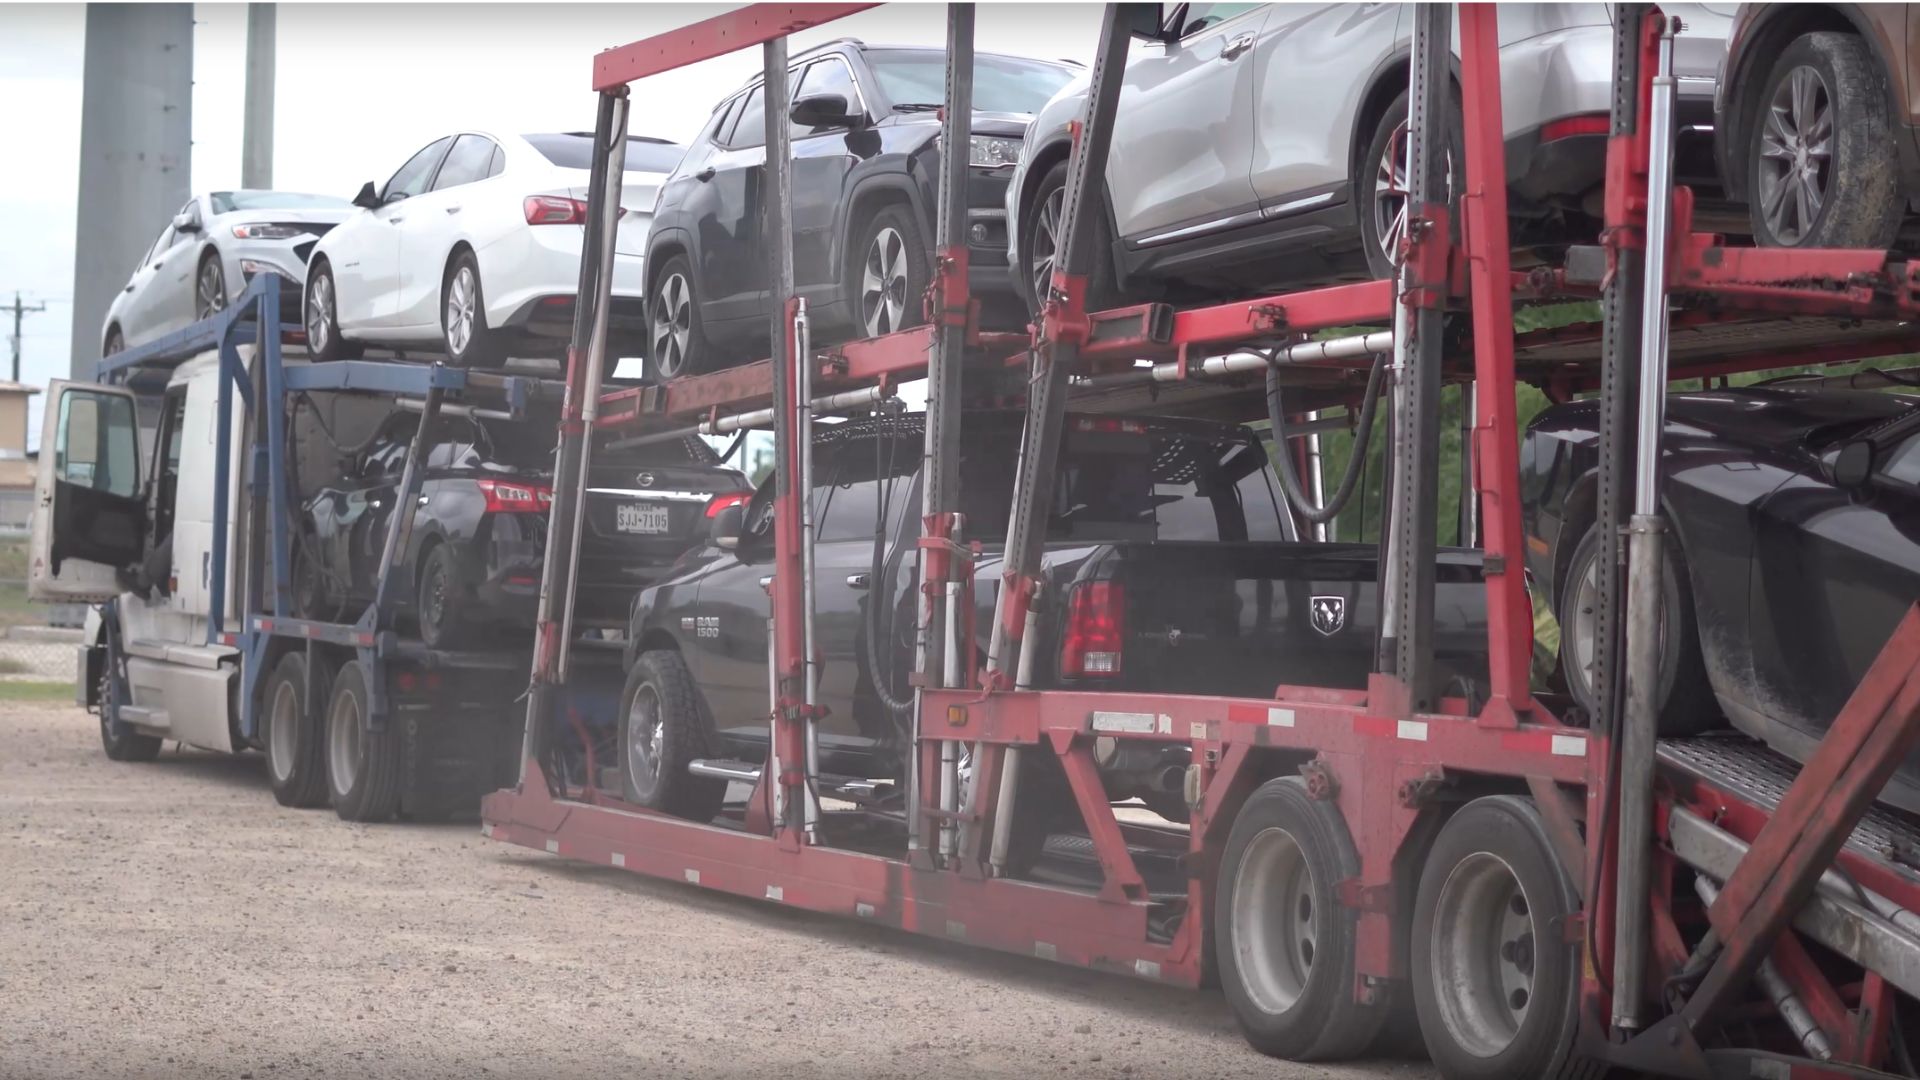 Big Valley Auto Auction Transportation Services: A Pricing Breakdown